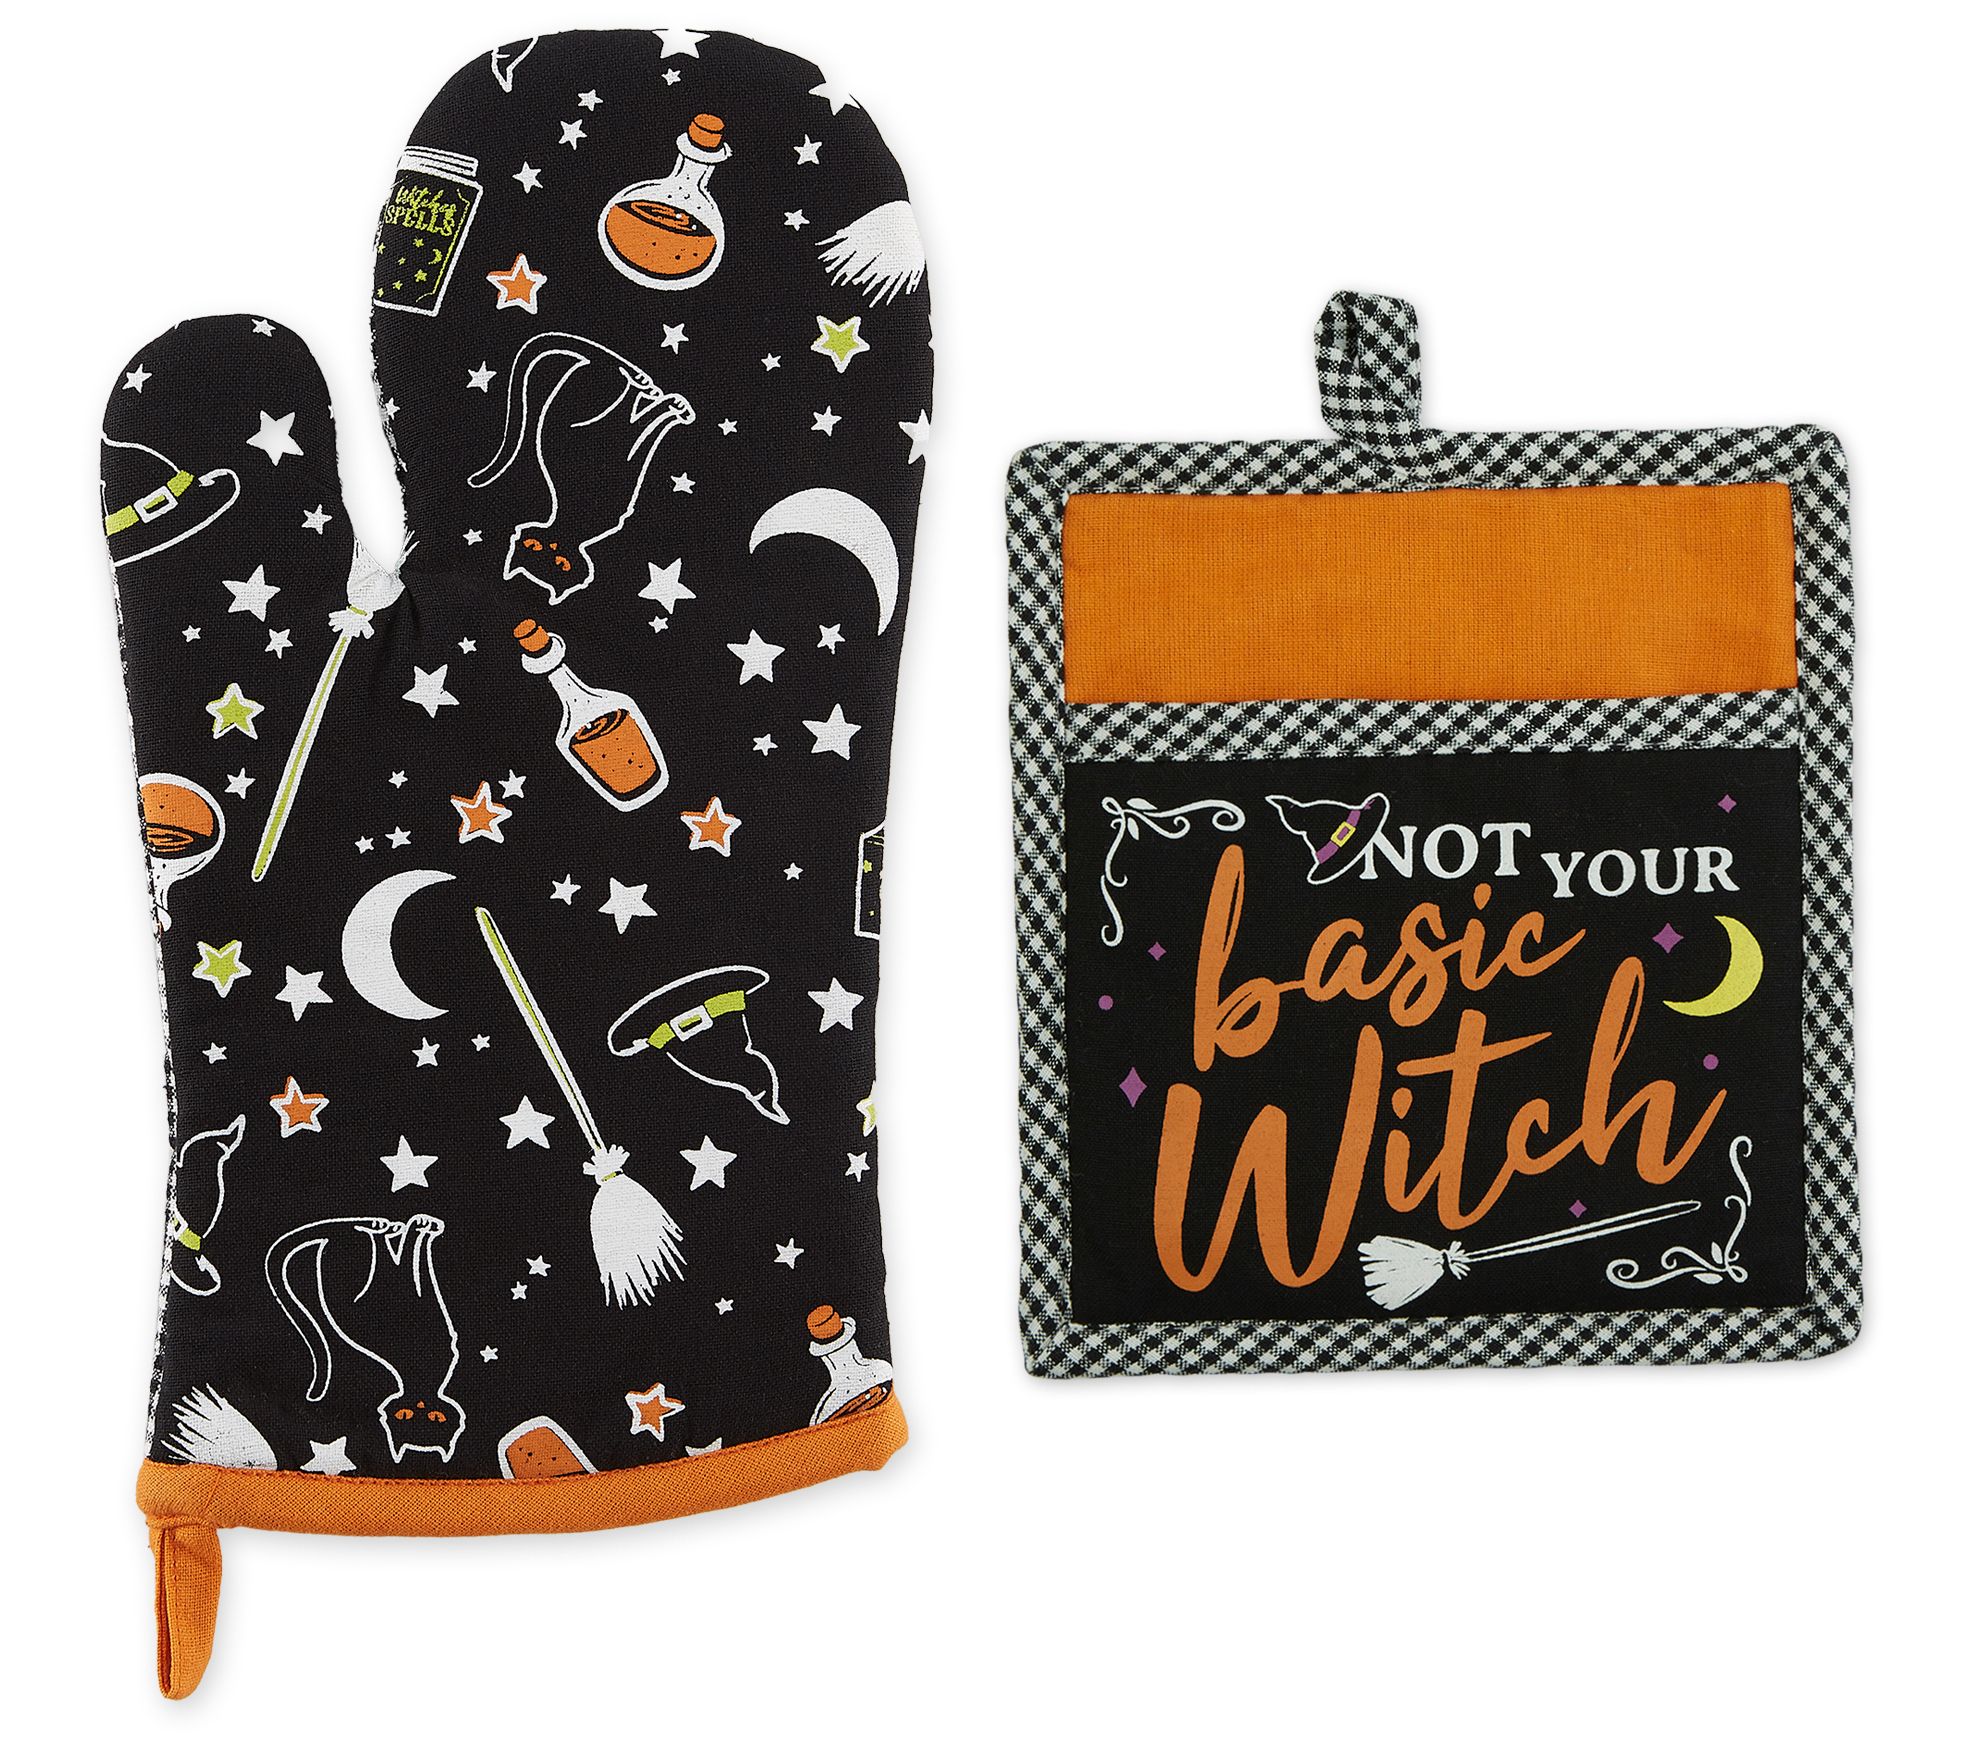 Includes 1 Oven Mitt and 2 Pot Holders Kitchen Linen Set Witch/Halloween 